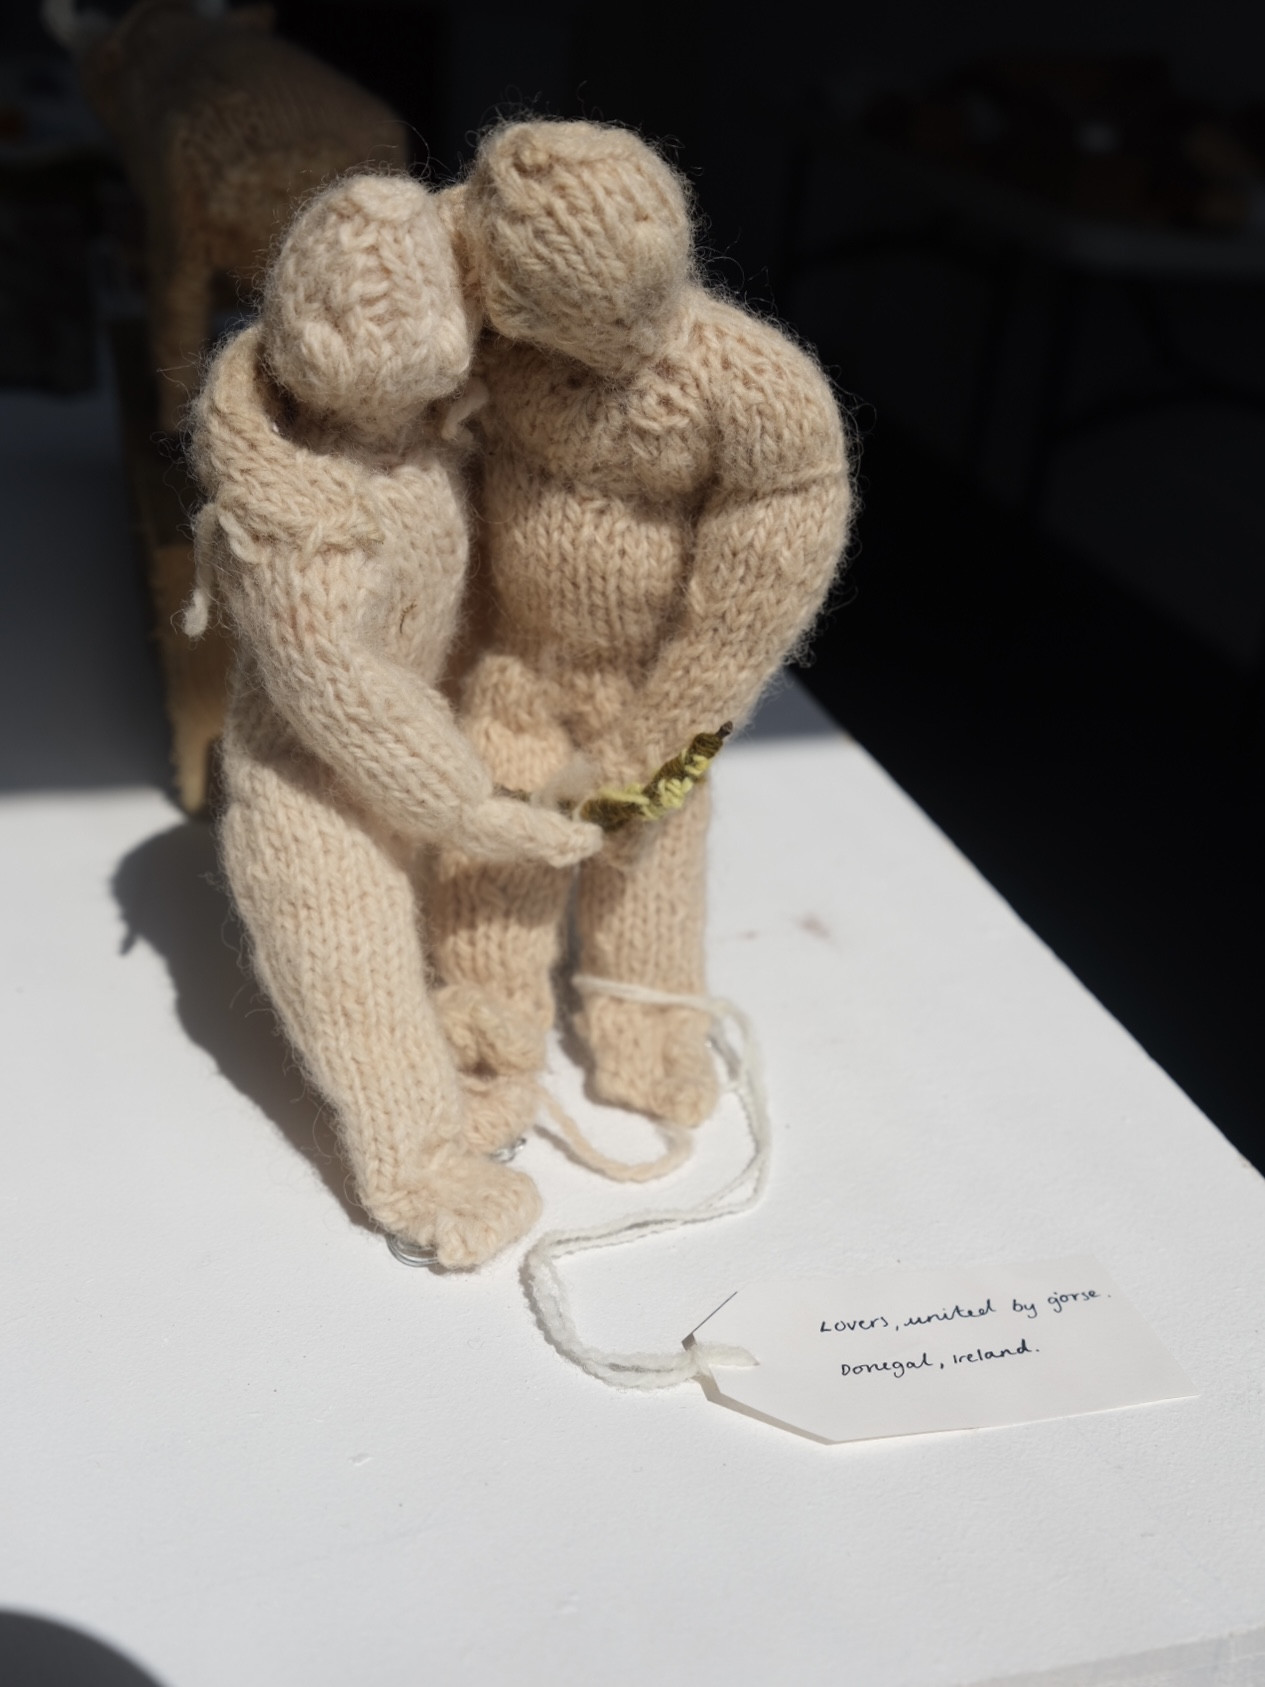 *Lovers, united by gorse*, hand knitted in heritage wools dyed with bark, gorse, onions and iron